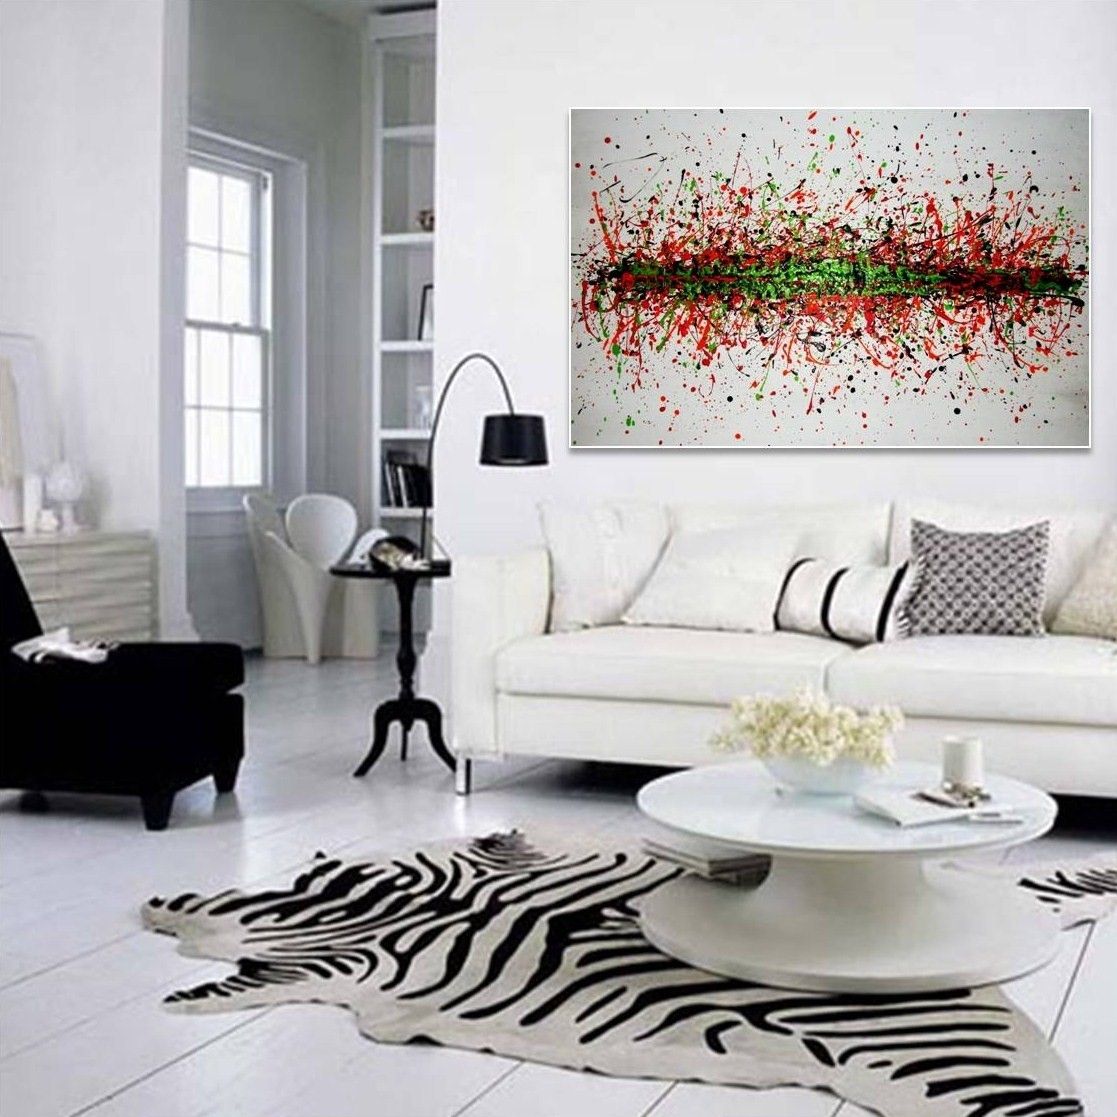 Abstract Painting For Living Room Living Room Abstract Wall Art Regarding Most Popular Abstract Wall Art Living Room (View 15 of 20)